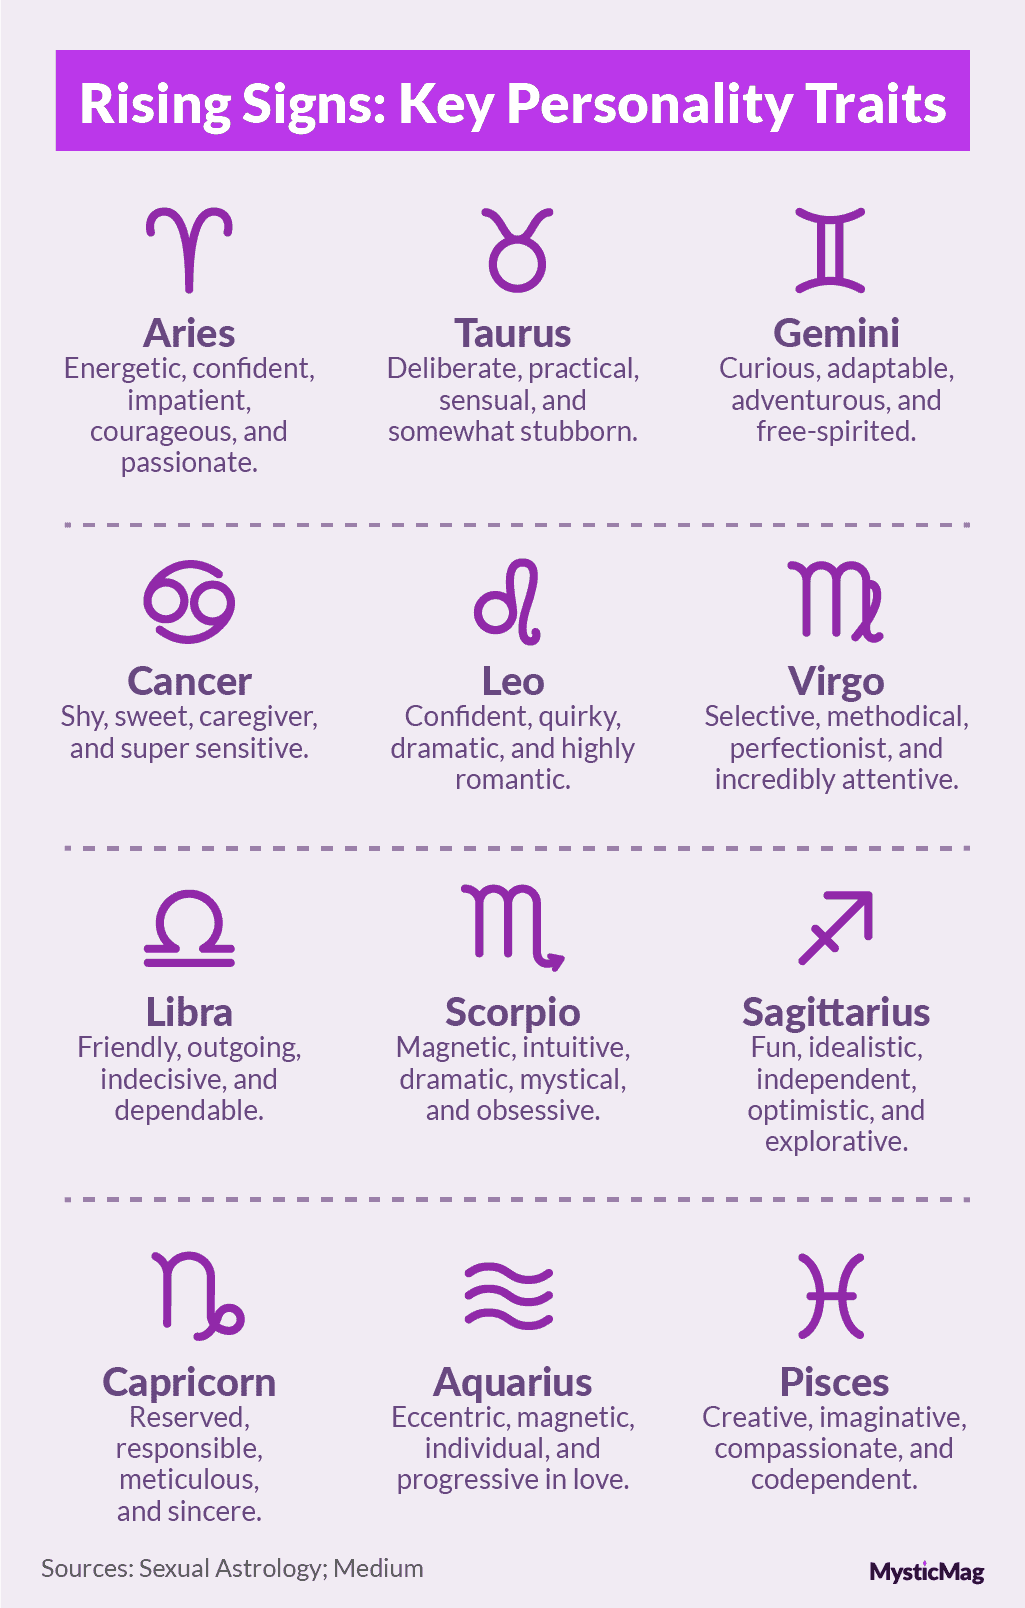 What Your Rising Sign Says About You in Relationships